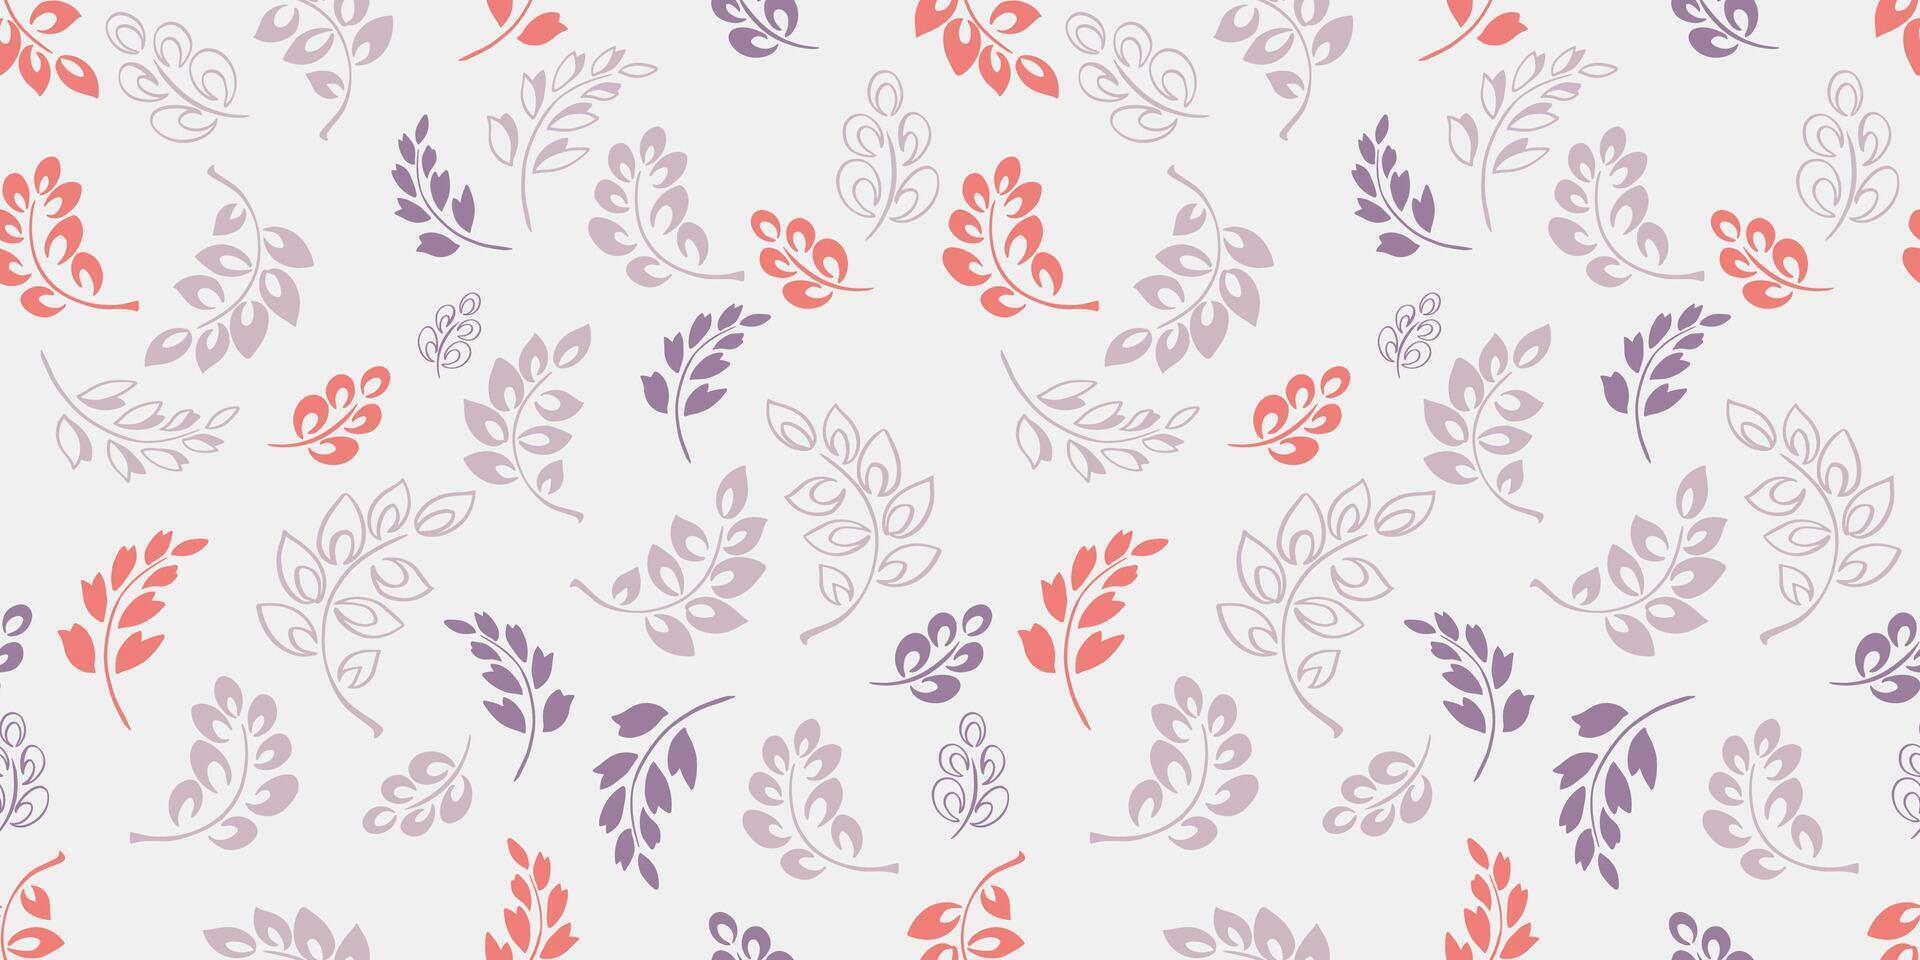 Pastel seamless pattern with abstract branches with tiny leaves. hand drawn sketch. Simple white background with creative cute floral stems in shapes dots, drops, spots printing. Template vector